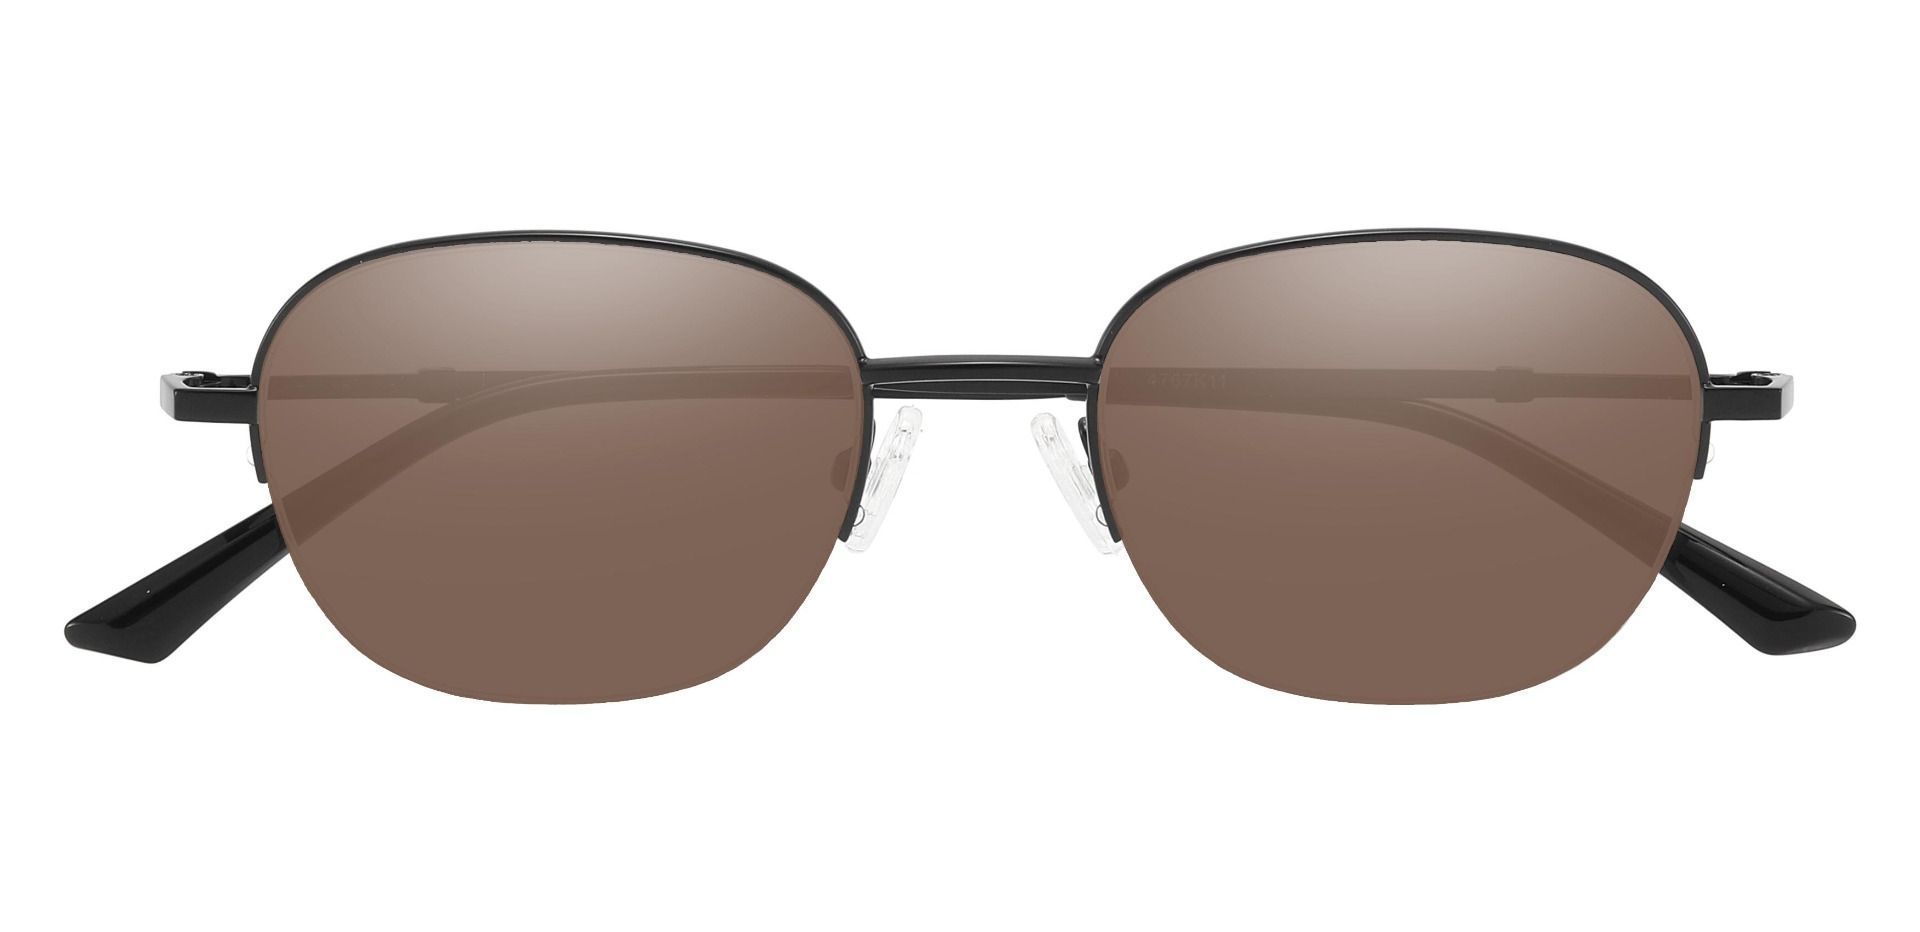 Rochester Oval Non-Rx Sunglasses - Black Frame With Brown Lenses